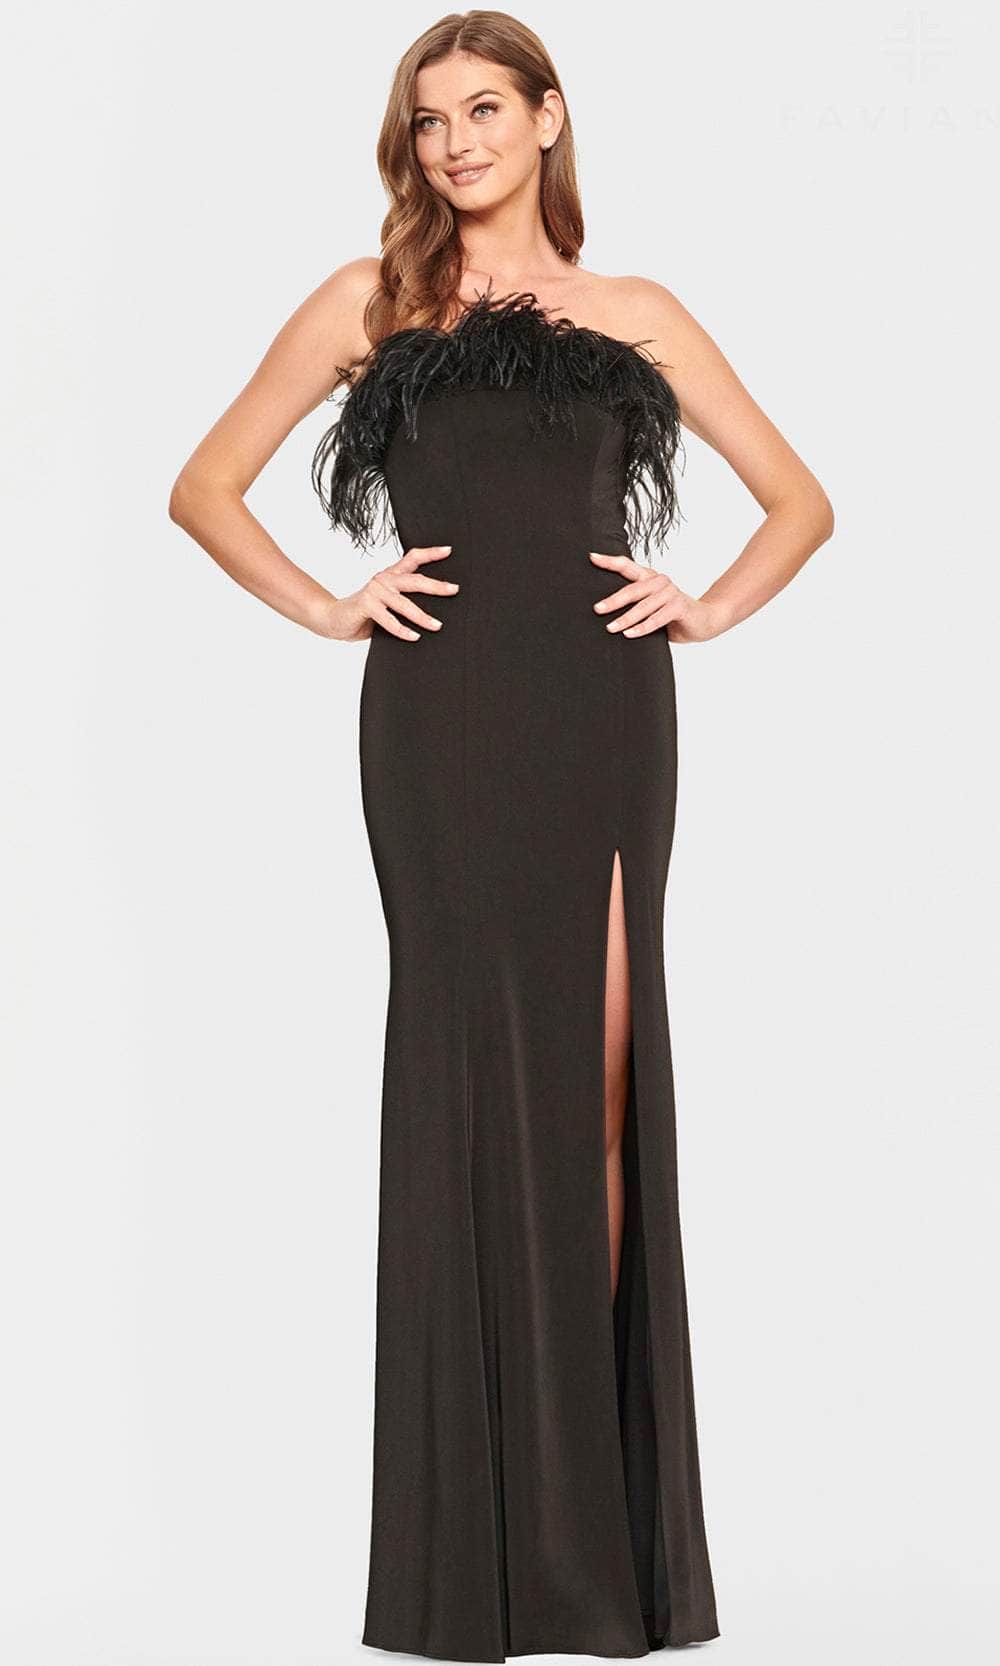 Image of Faviana S10851 - Feathered Faille Satin Prom Dress